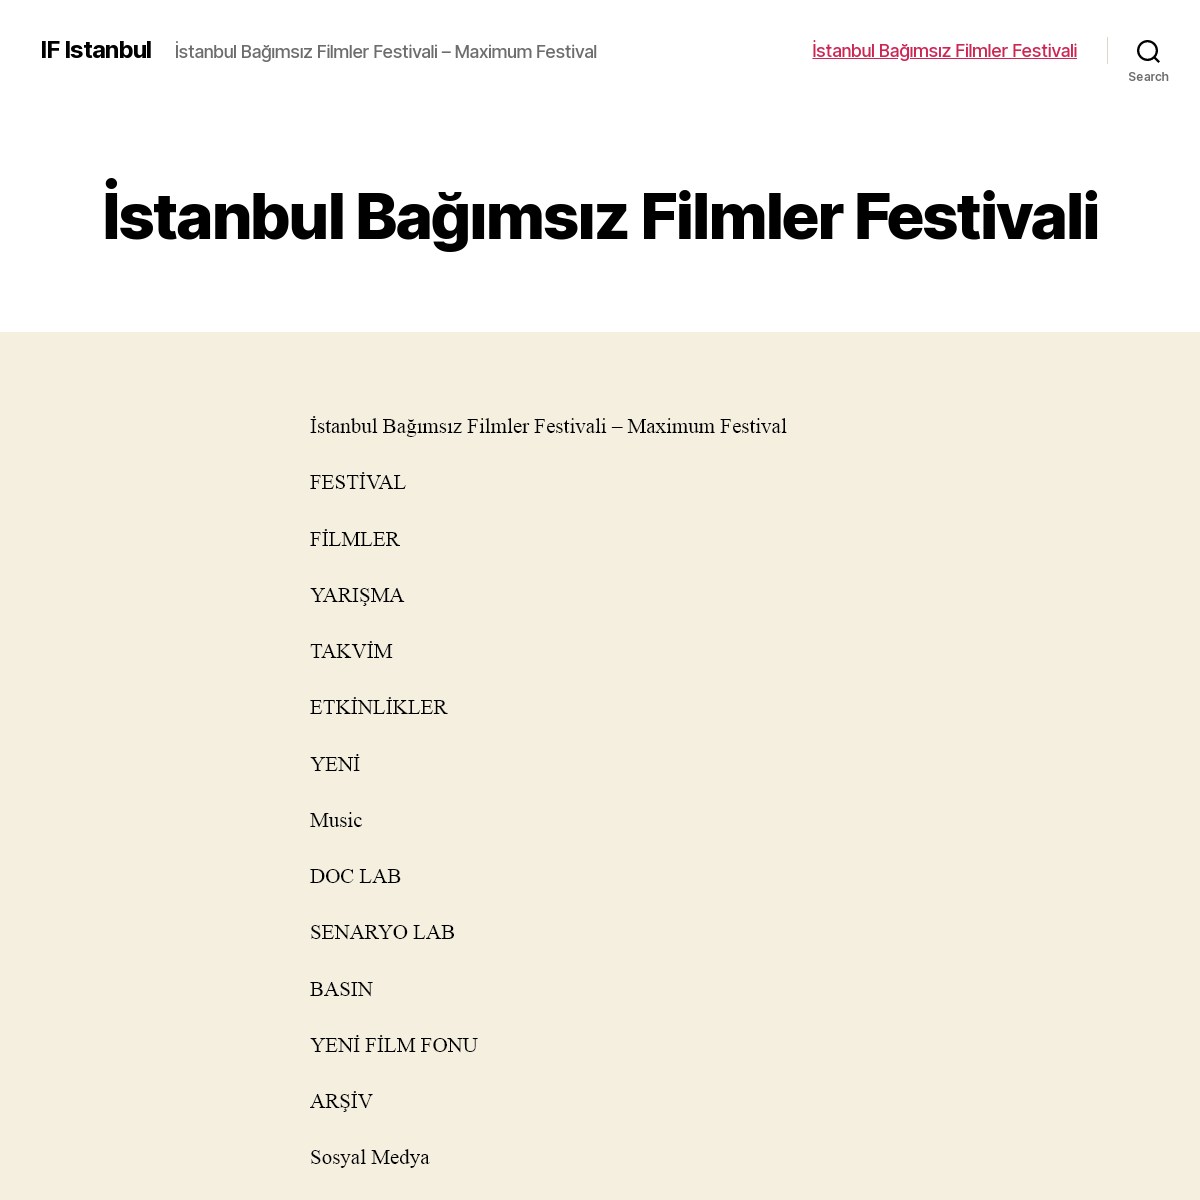 A complete backup of ifistanbul.com